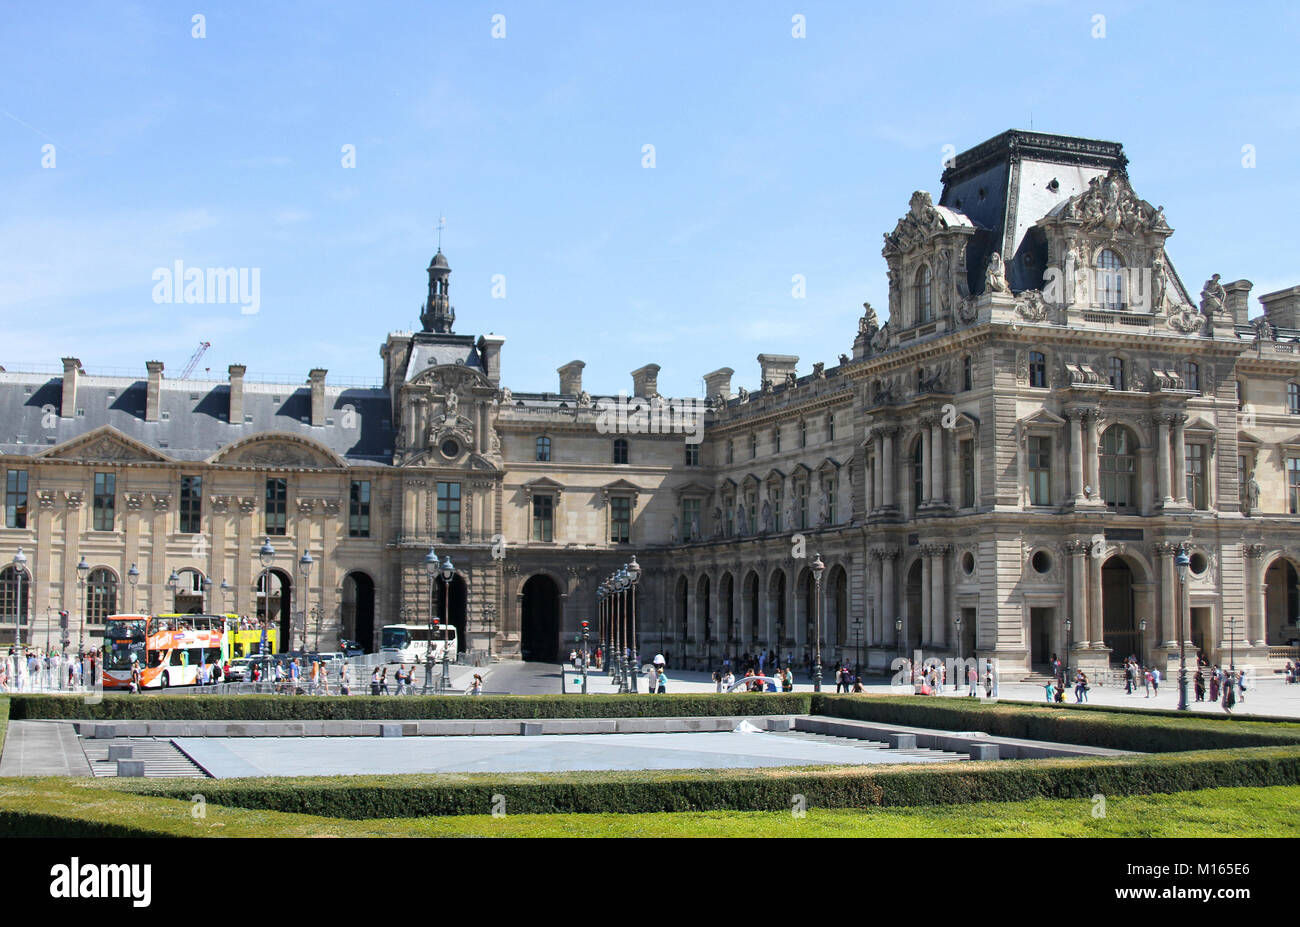 View of the Richelieu Wing of the Louvre Palace, Paris, France. Stock Photo